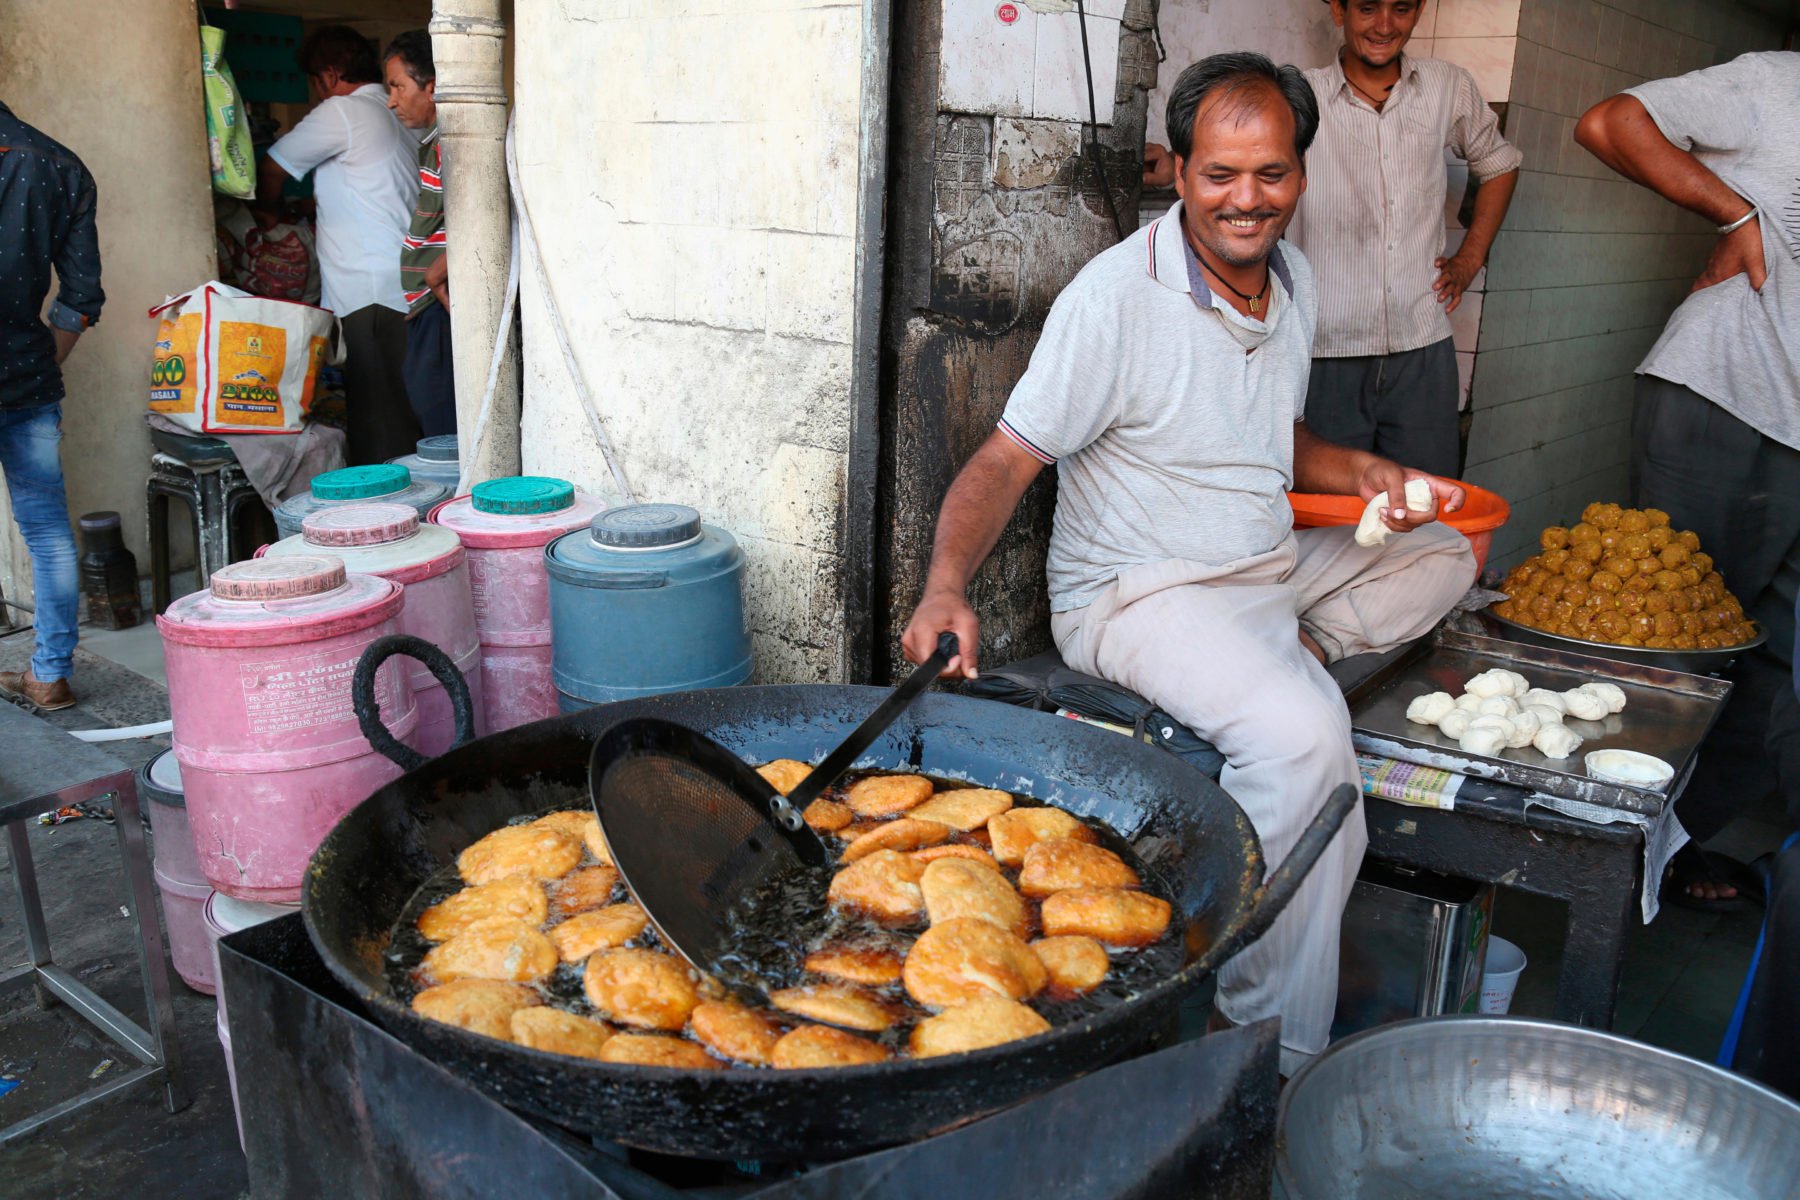 Kachoris frying at a sweetshop in Rajasthan. Millions of consumers in India are not aware of the damage unsustainable palm oil production is doing [image: Alamy]